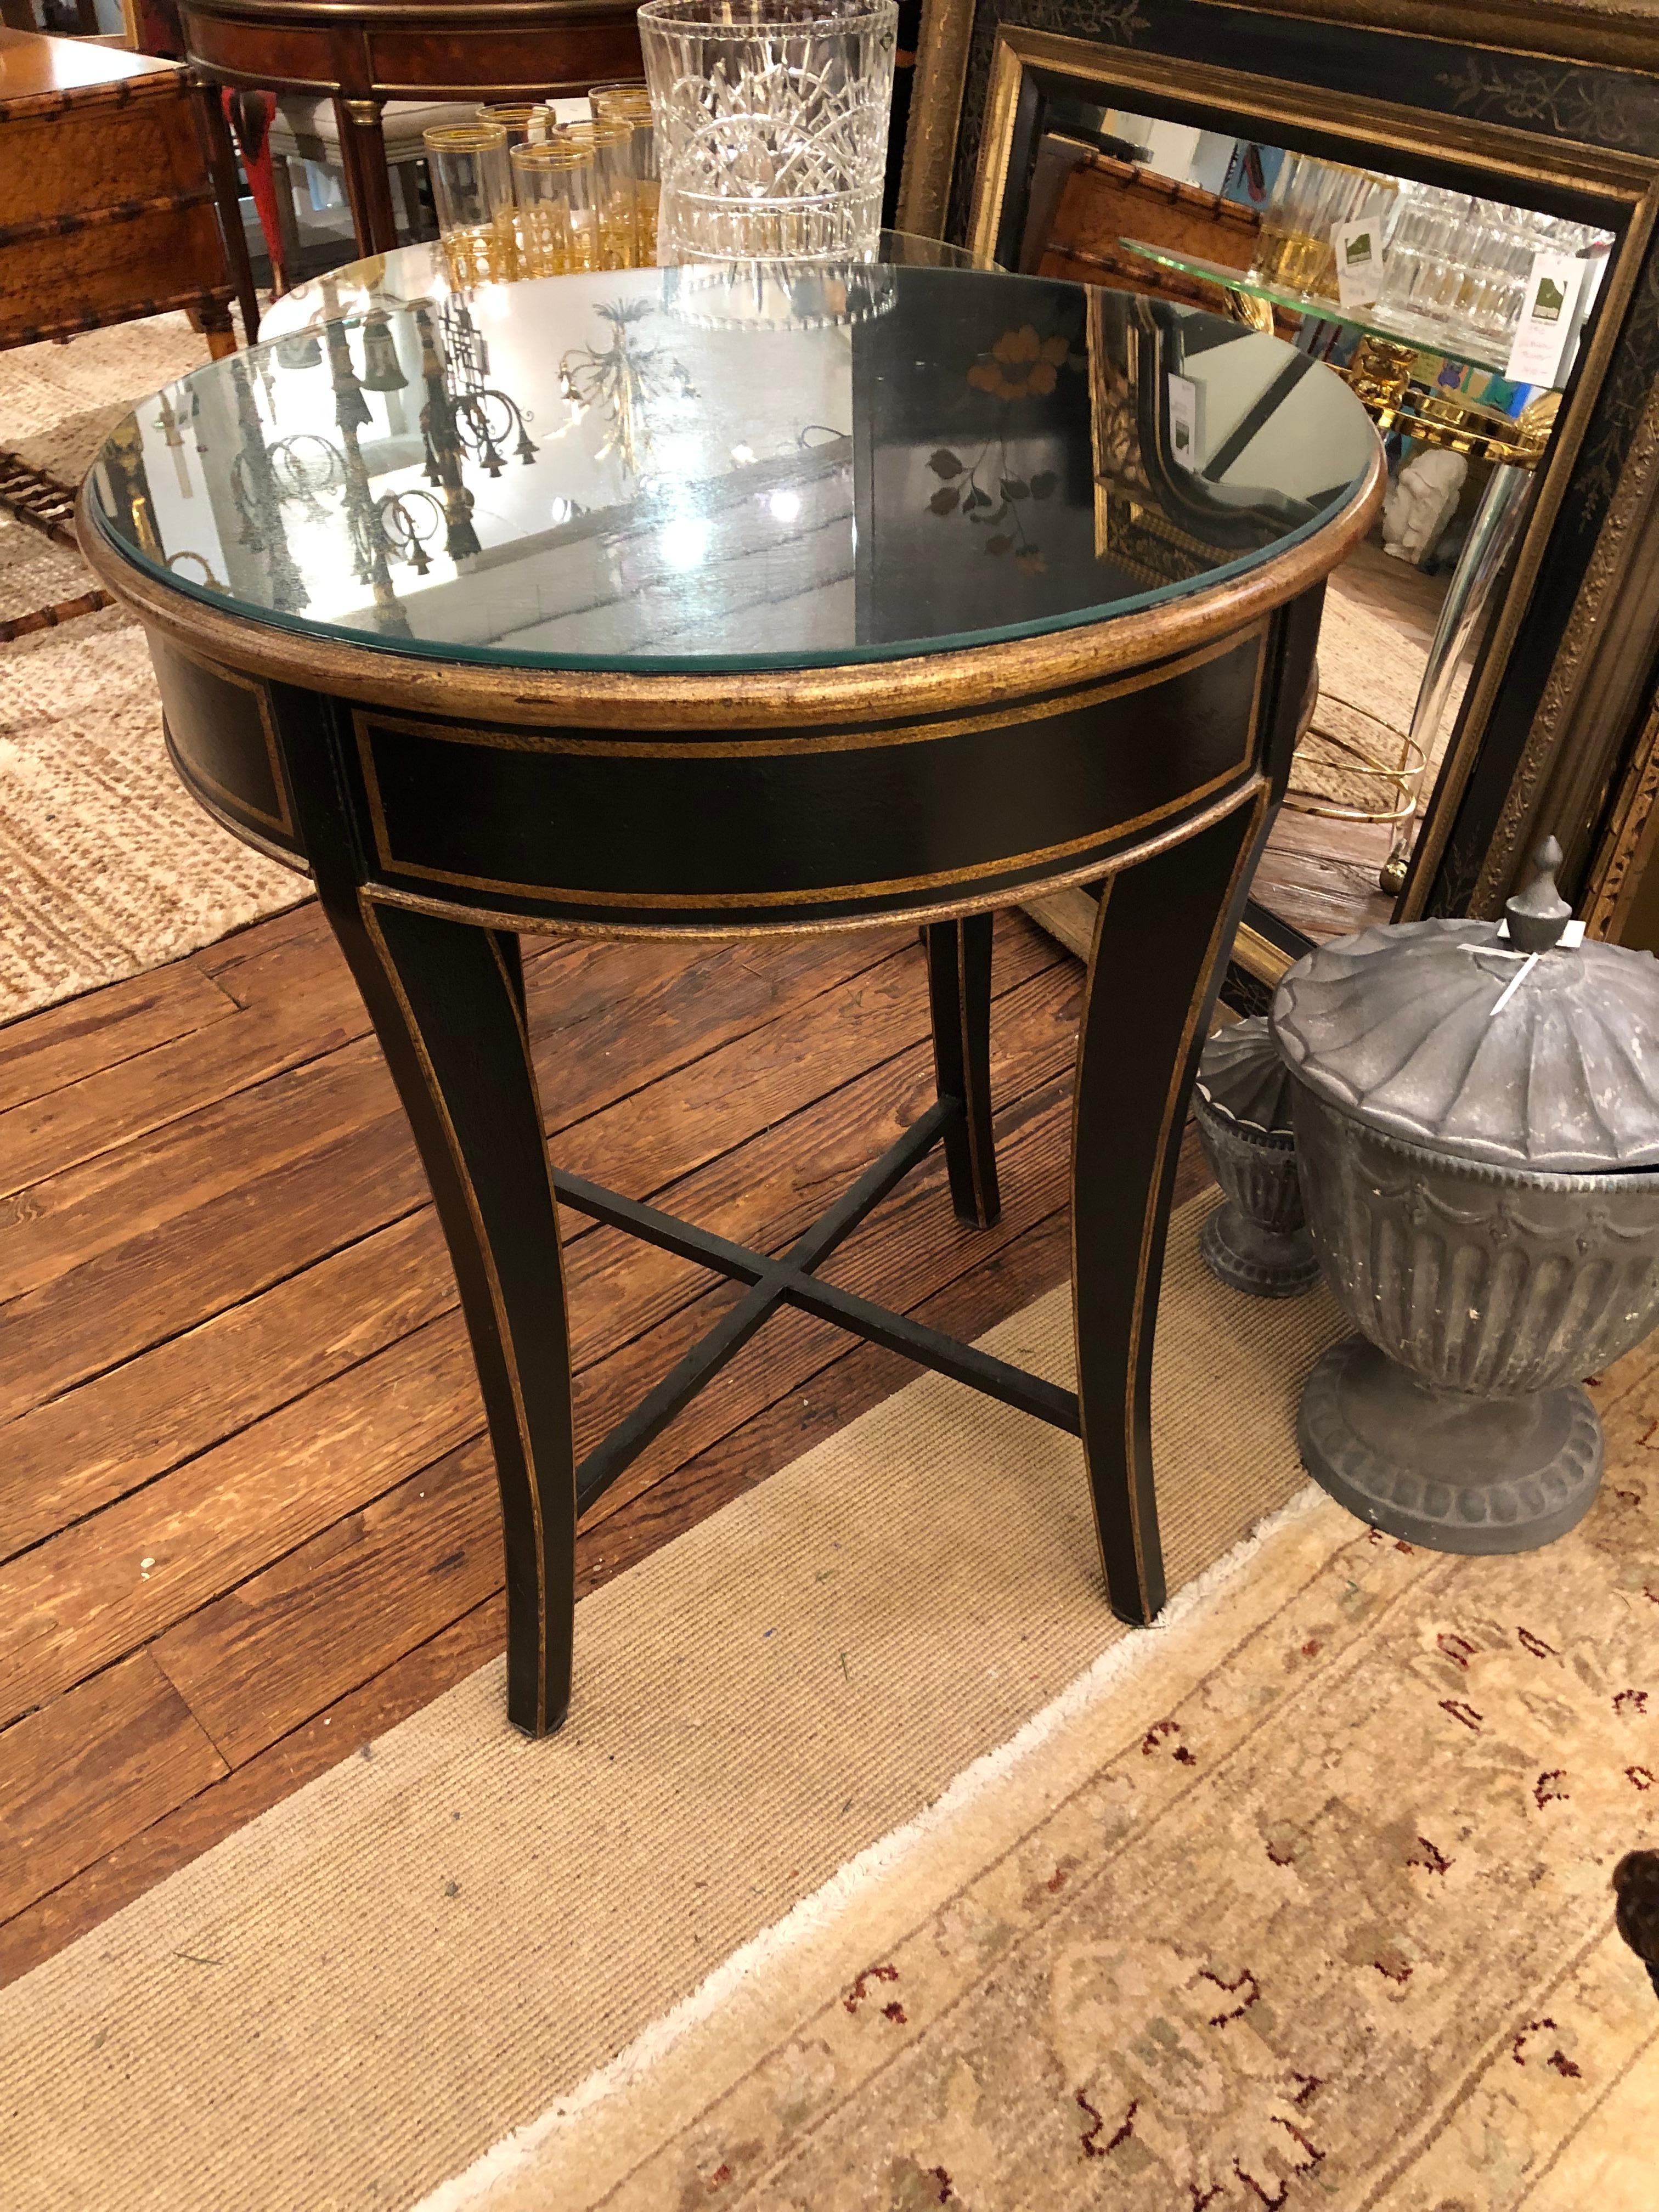 Transitional Hollywood Regency style round center or side table in black and gold, having tapered slightly splayed legs and handsome stretcher. Comes with heavy piece of protective glass on top.